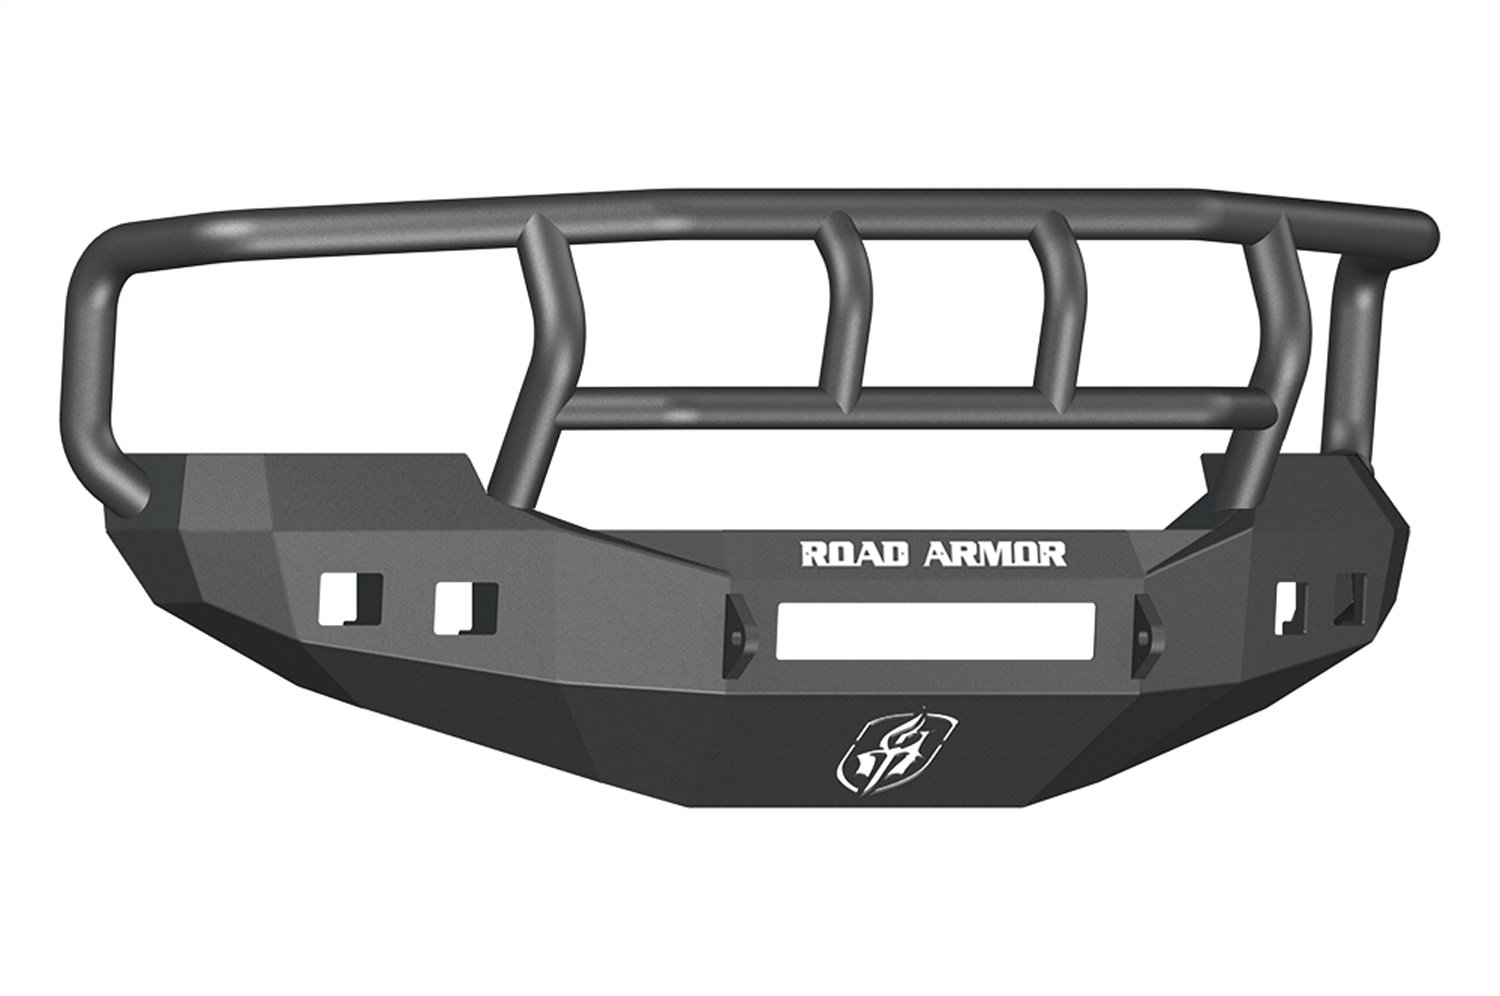 605R2B-NW Stealth Non-Winch Front Bumper Fits Select Ford Excursion/F-250/F-350/F-450 Super-Duty